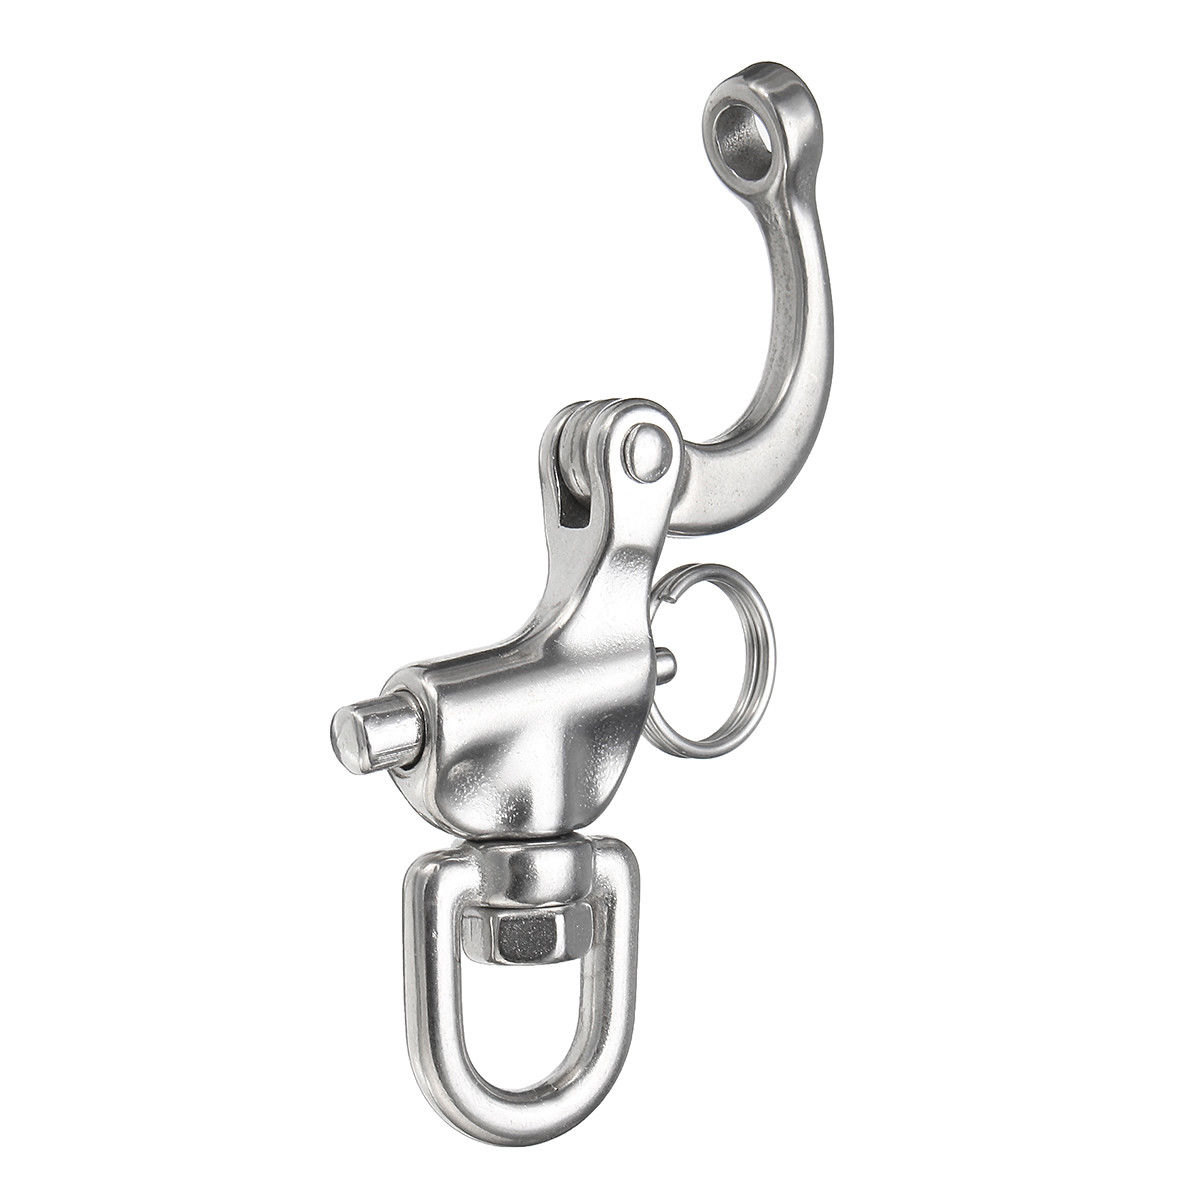 316 Stainless Steel Swivel Shackle, Quick Release Boat Anchor Chain Eye  Shackle, Swivel Snap Hook For Marine Architectural